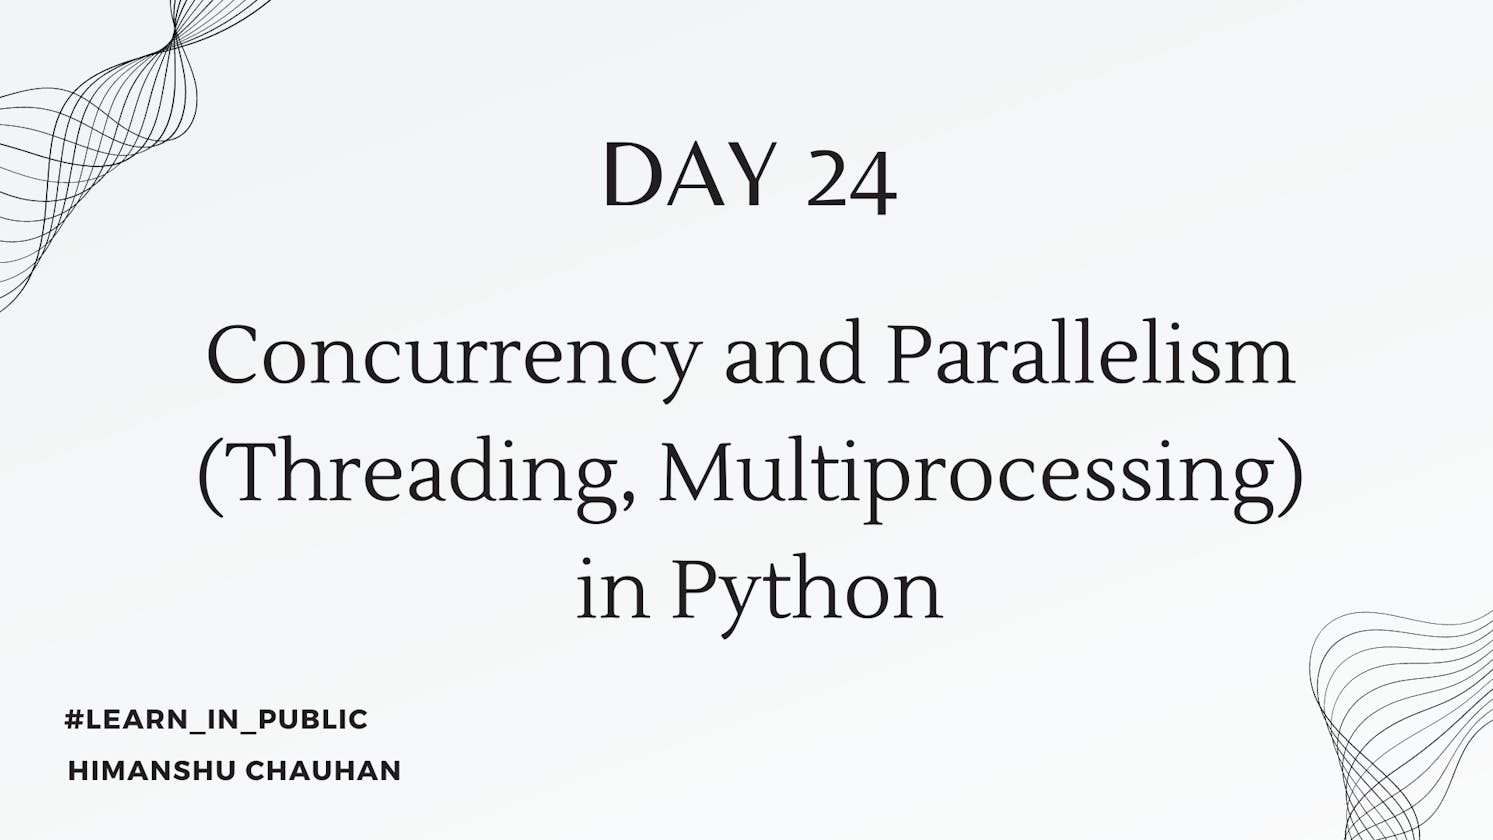 Day 24: Concurrency and Parallelism (Threading, Multiprocessing)